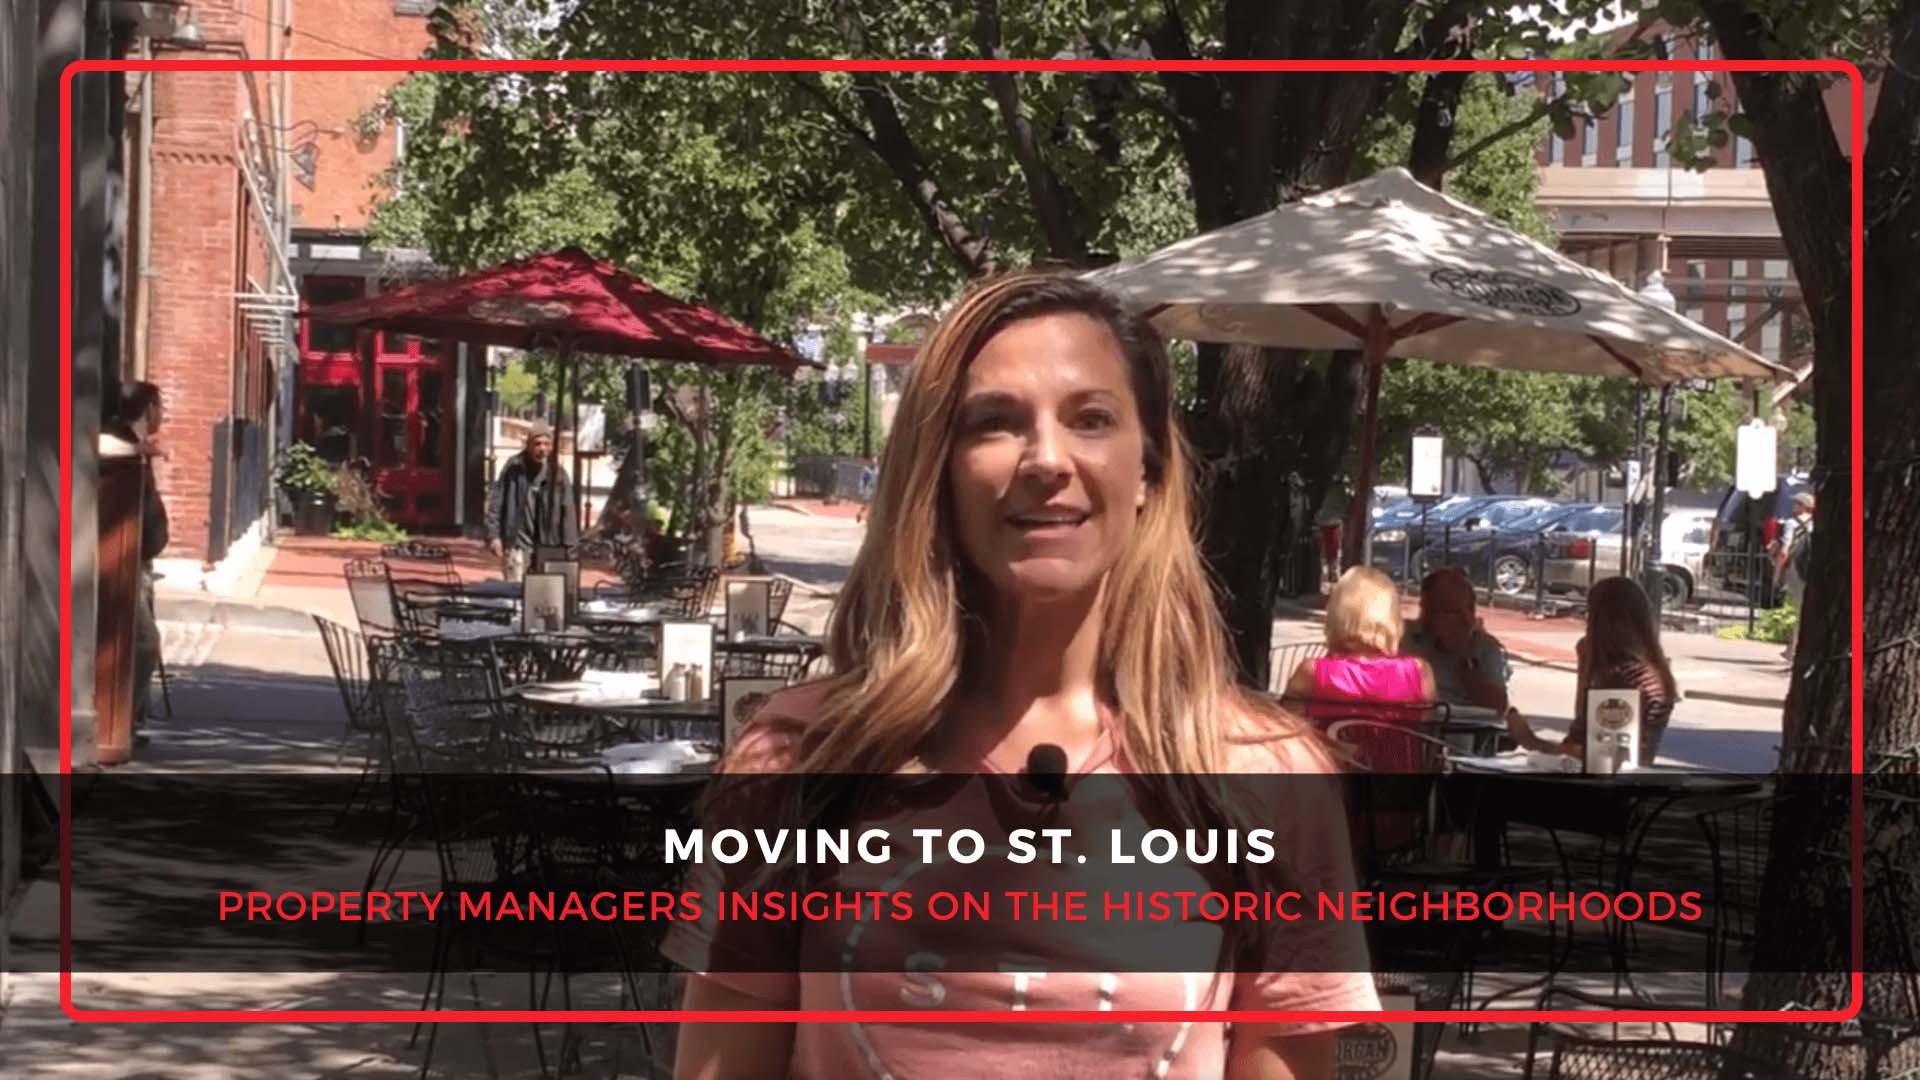 Moving to St. Louis | A Property Managers Insights on the Historic Neighborhoods